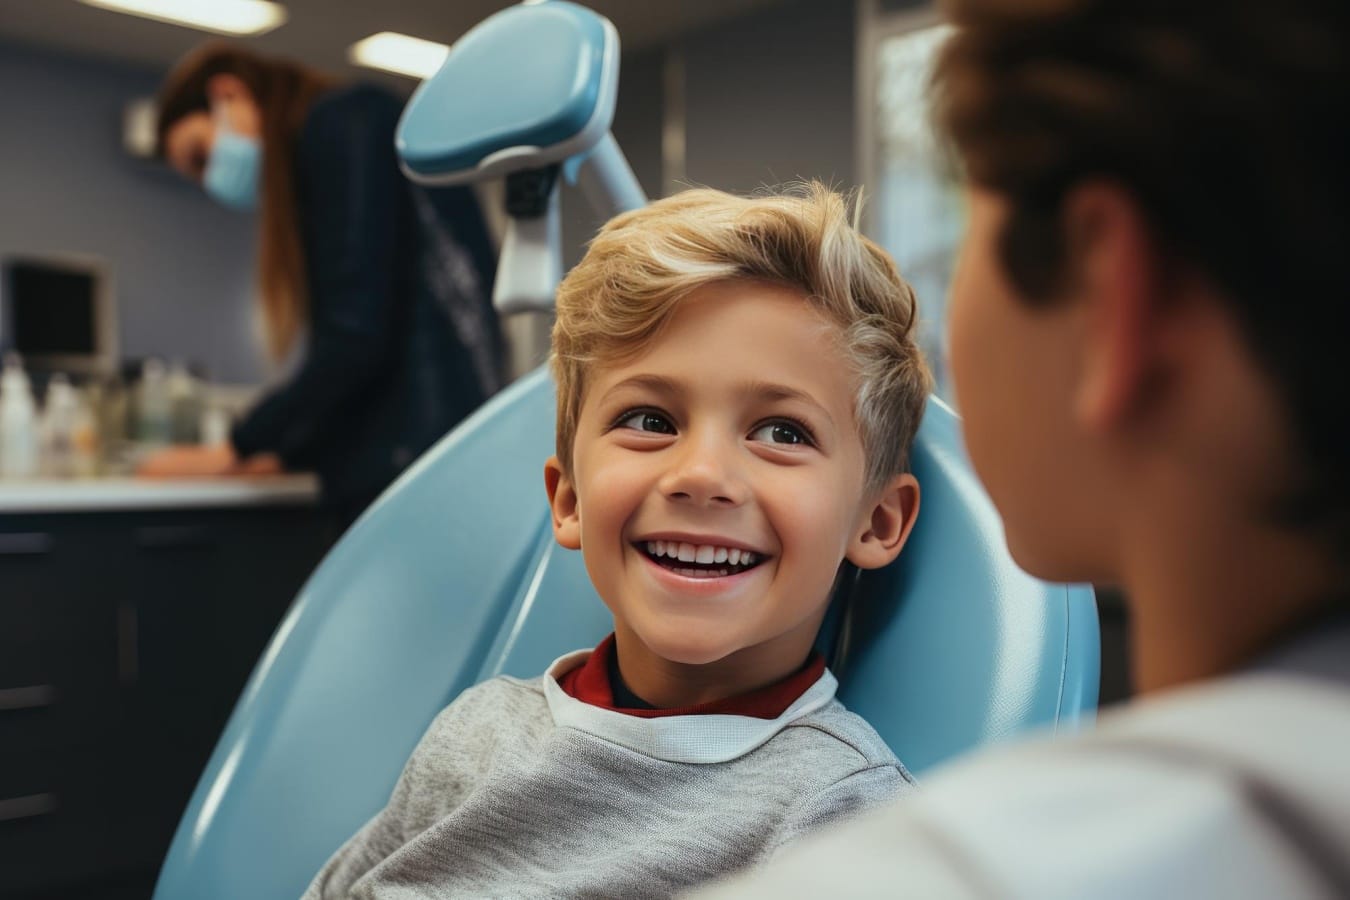 An enthusiastic blonde child with a bright smile sits comfortably in an orthodontic chair, eagerly awaiting Phase 1 treatment. The anticipation of a positive transformation shines through their joyful expression, radiating excitement for the orthodontic journey ahead.